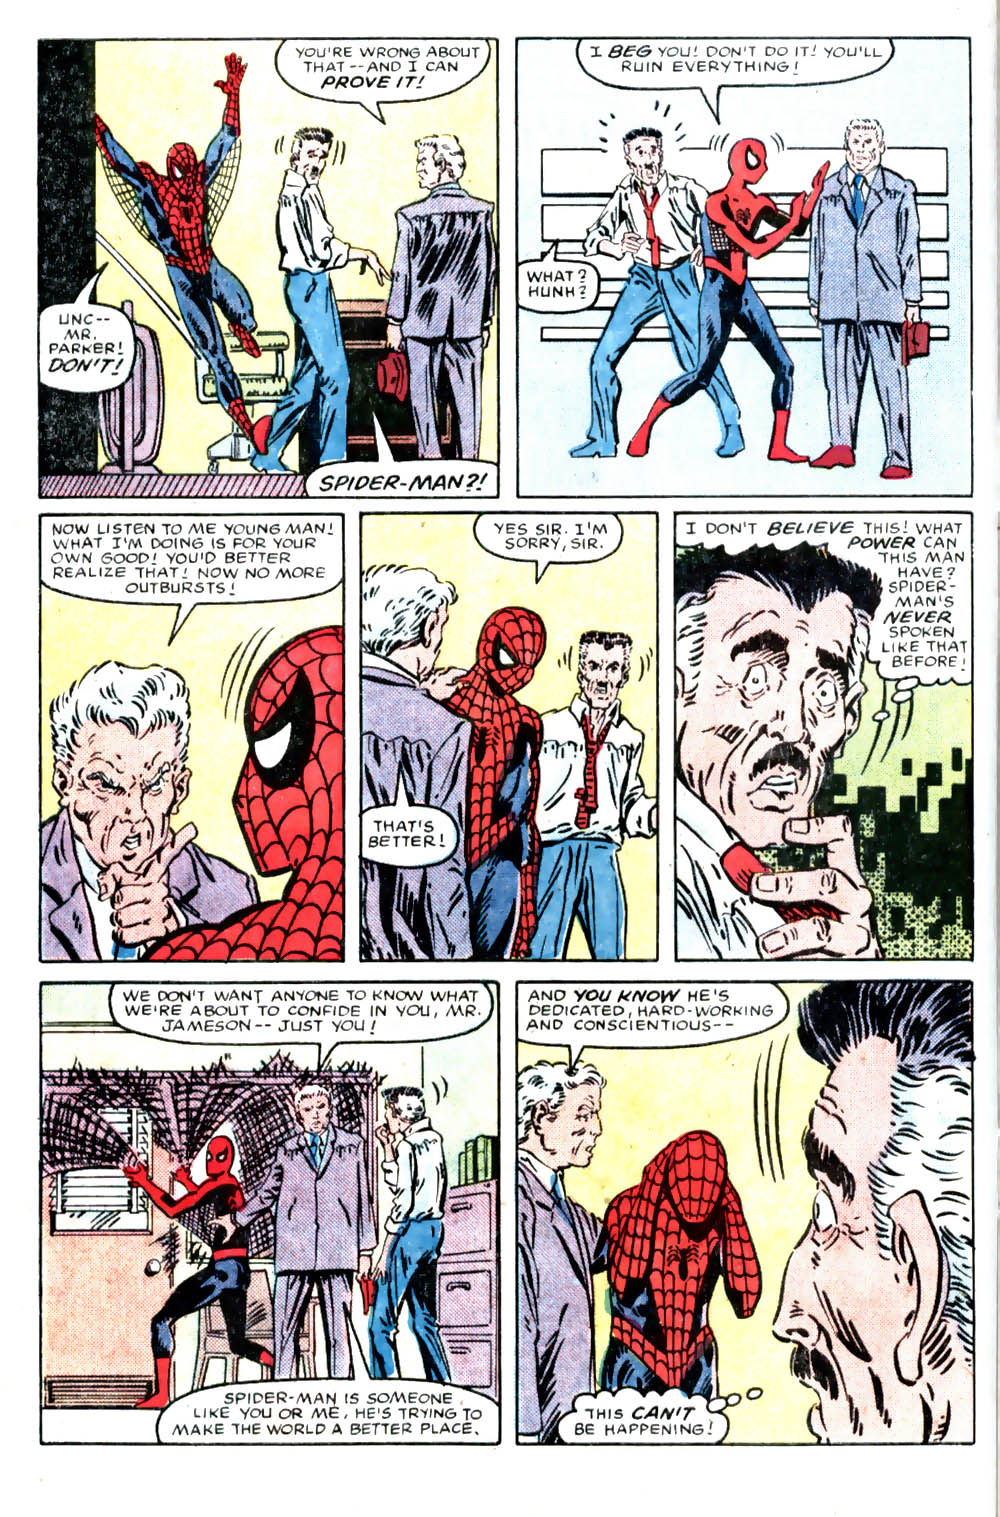 What If? (1977) issue 46 - Spiderman's uncle ben had lived - Page 17